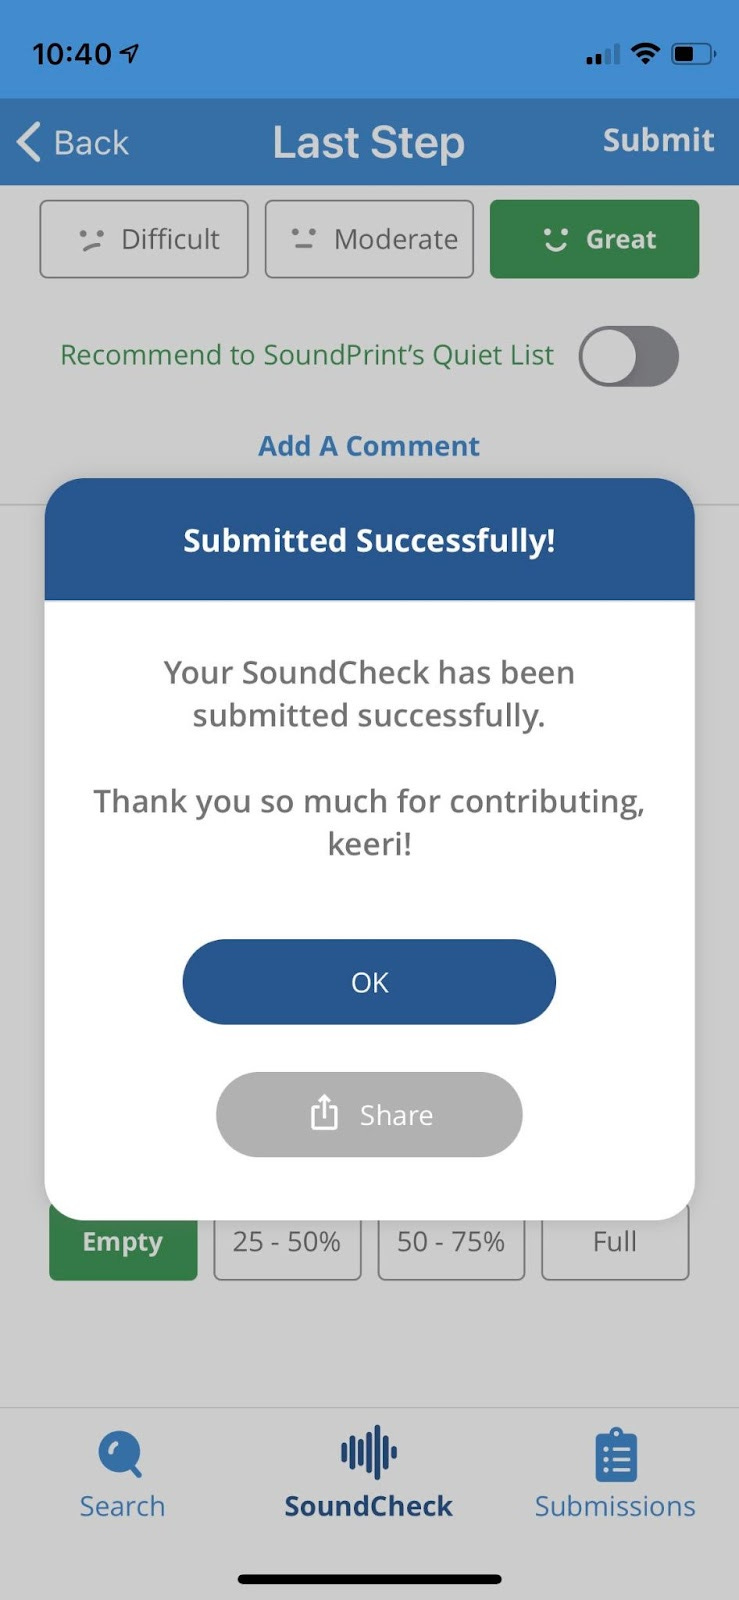 A pop up is over the screenshot we have been using. It is a white box with a blue top bar. It states "Your SoundCheck has been submitted successfully. Thank you so much for contributing, Keeri!" A blue button says "ok" and a grey button says "share."